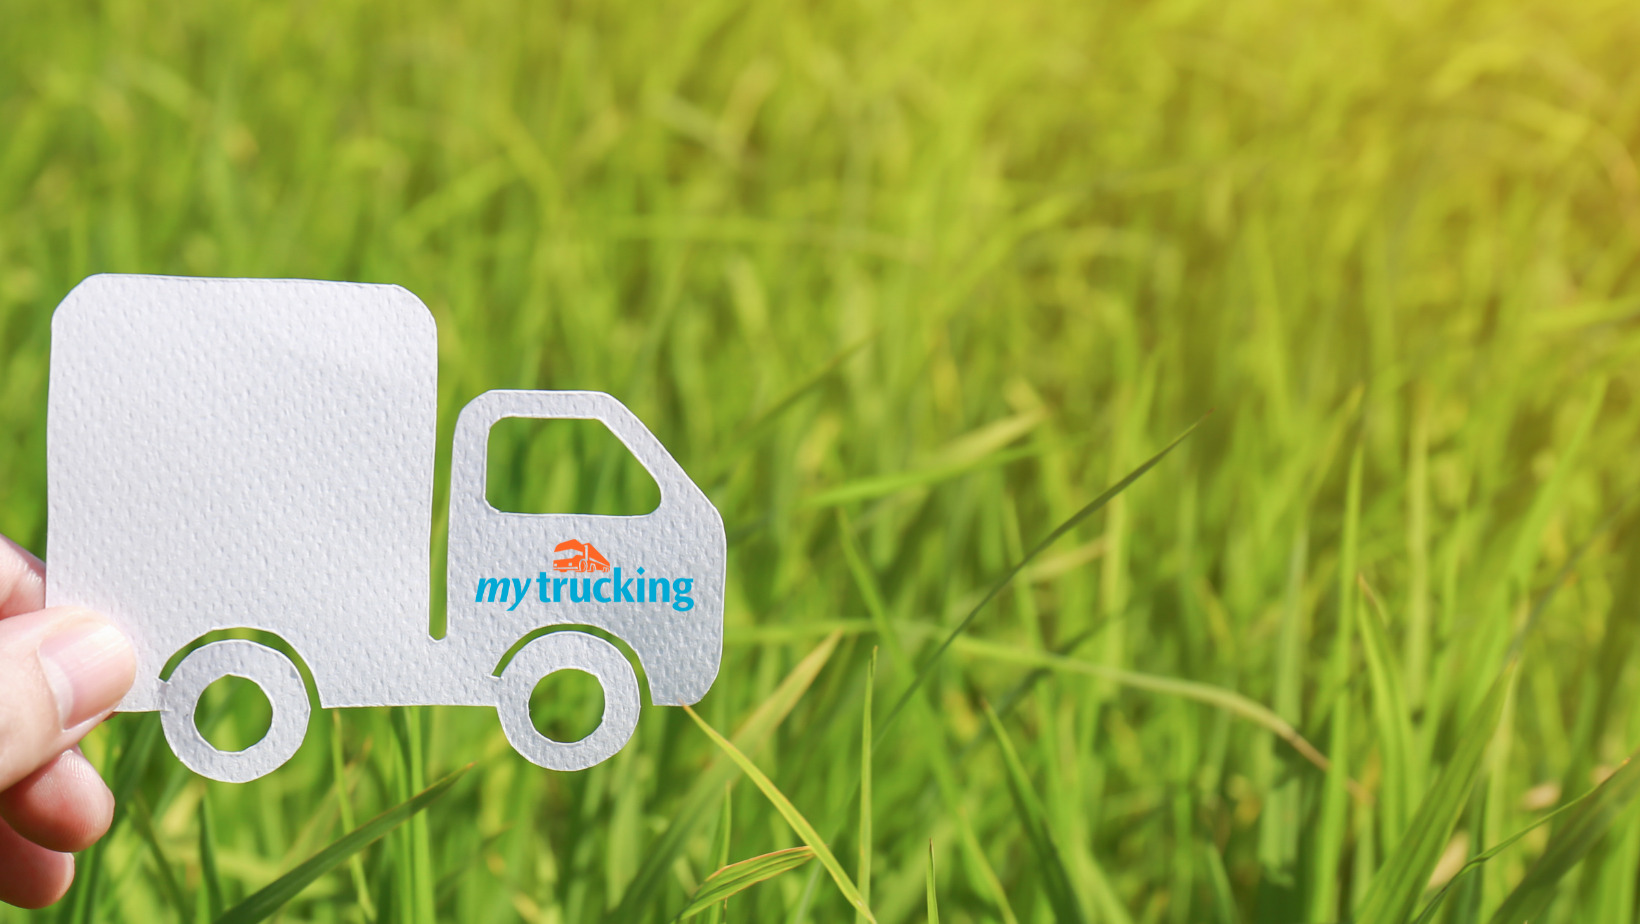 MyTrucking spring clean